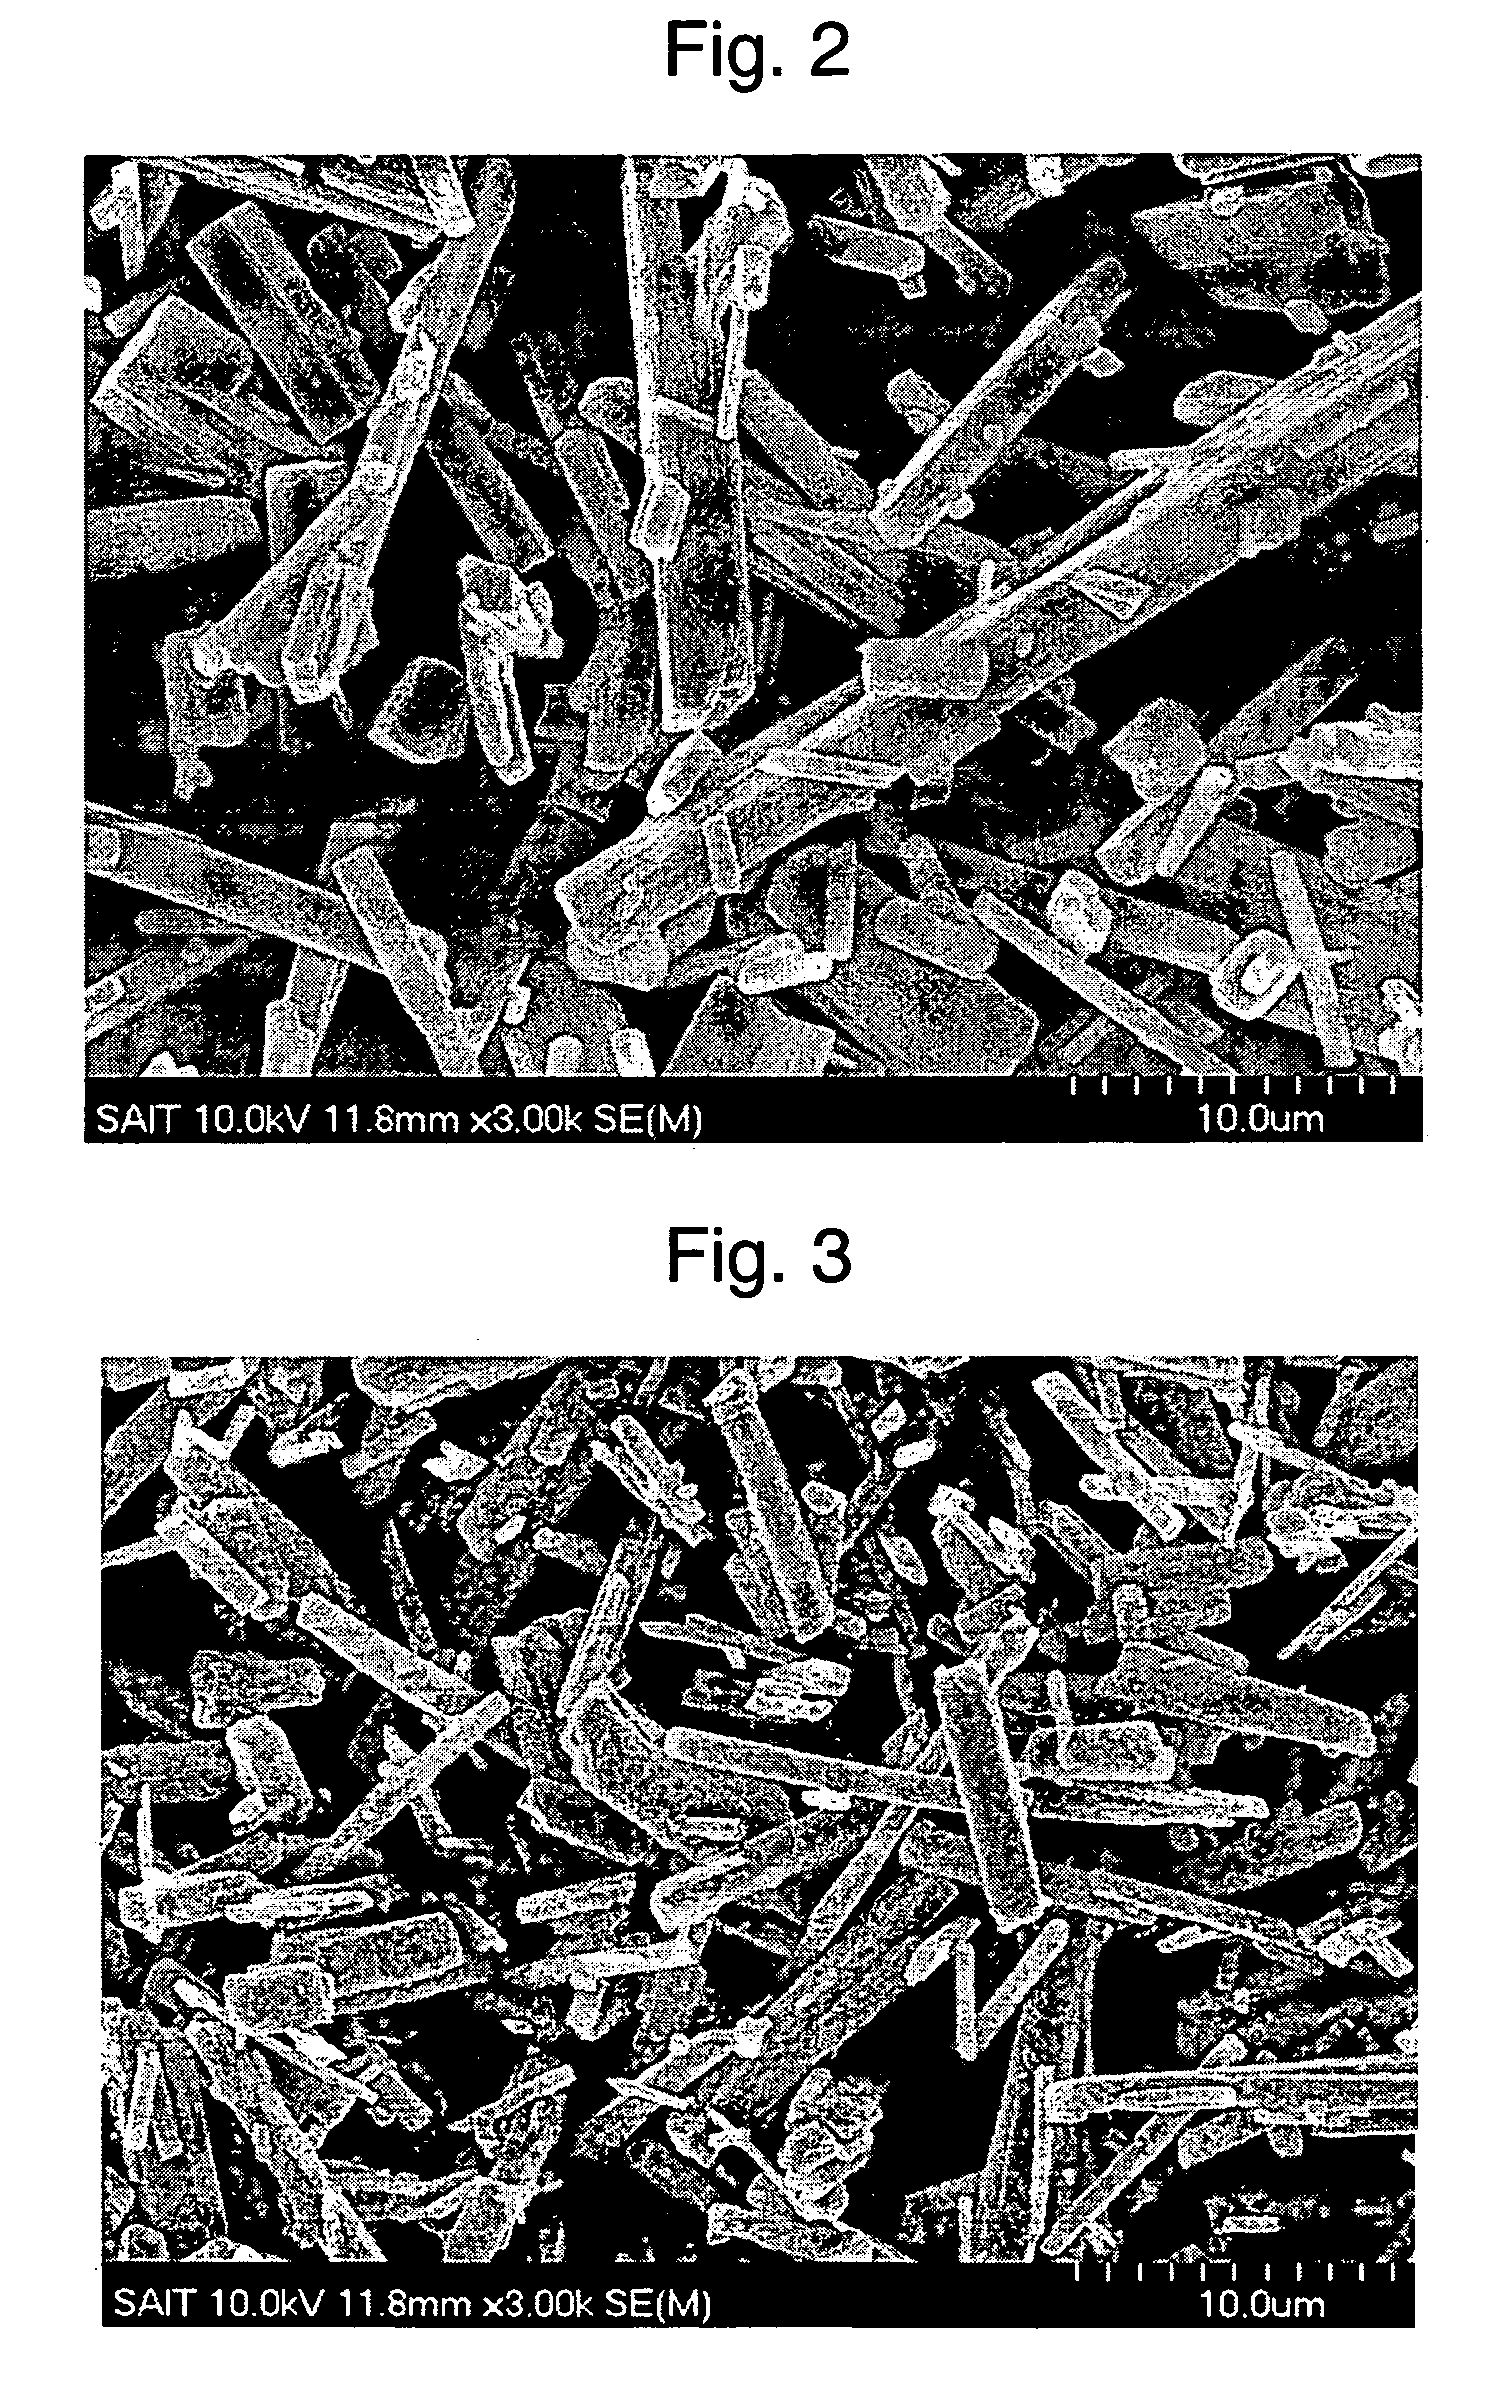 Carbon-metal composite material and process of preparing the same